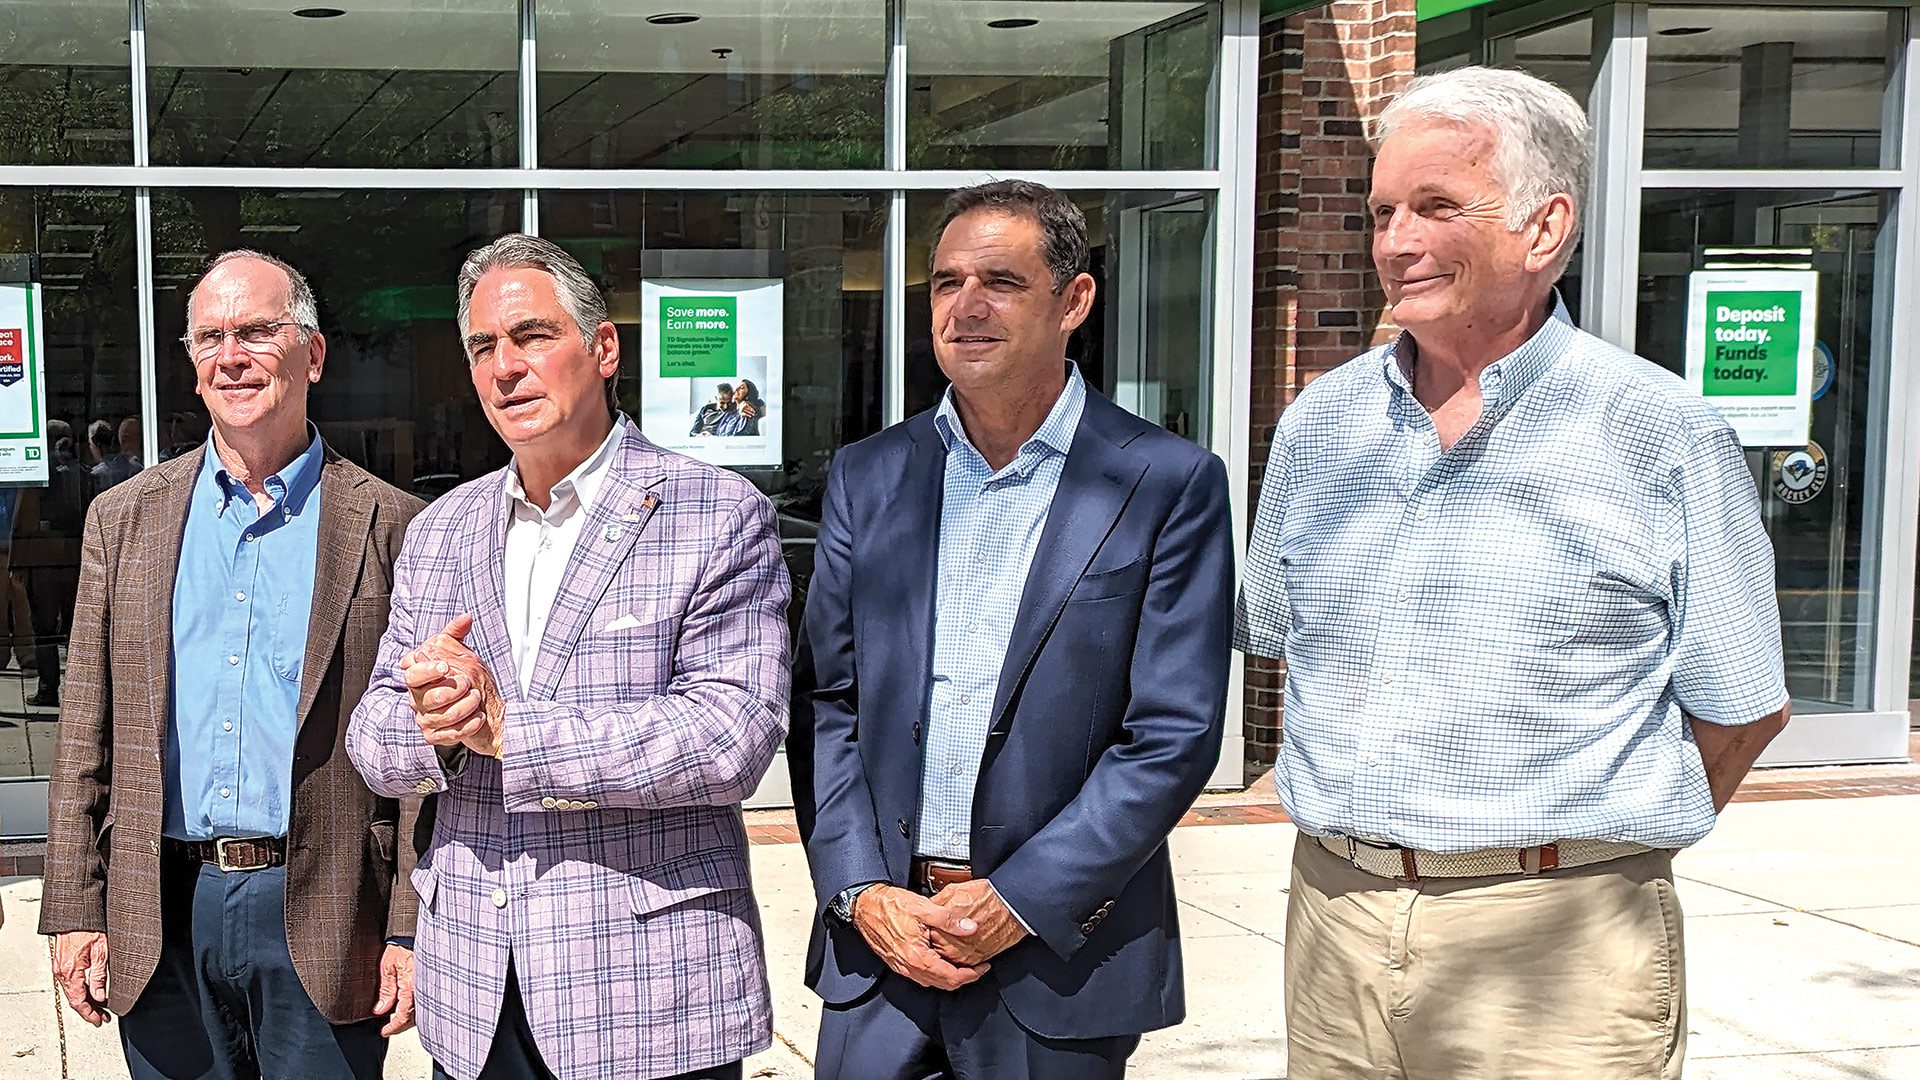 Pictured, from left: Balise Auto Group President Jeb Balise, Springfield Mayor Domenic Sarno, Balise Auto Group Chief Operating Officer Ben Sullivan, and Jack Dill, president and CEO of Colebrook Realty Services, which owns the TD Bank tower.